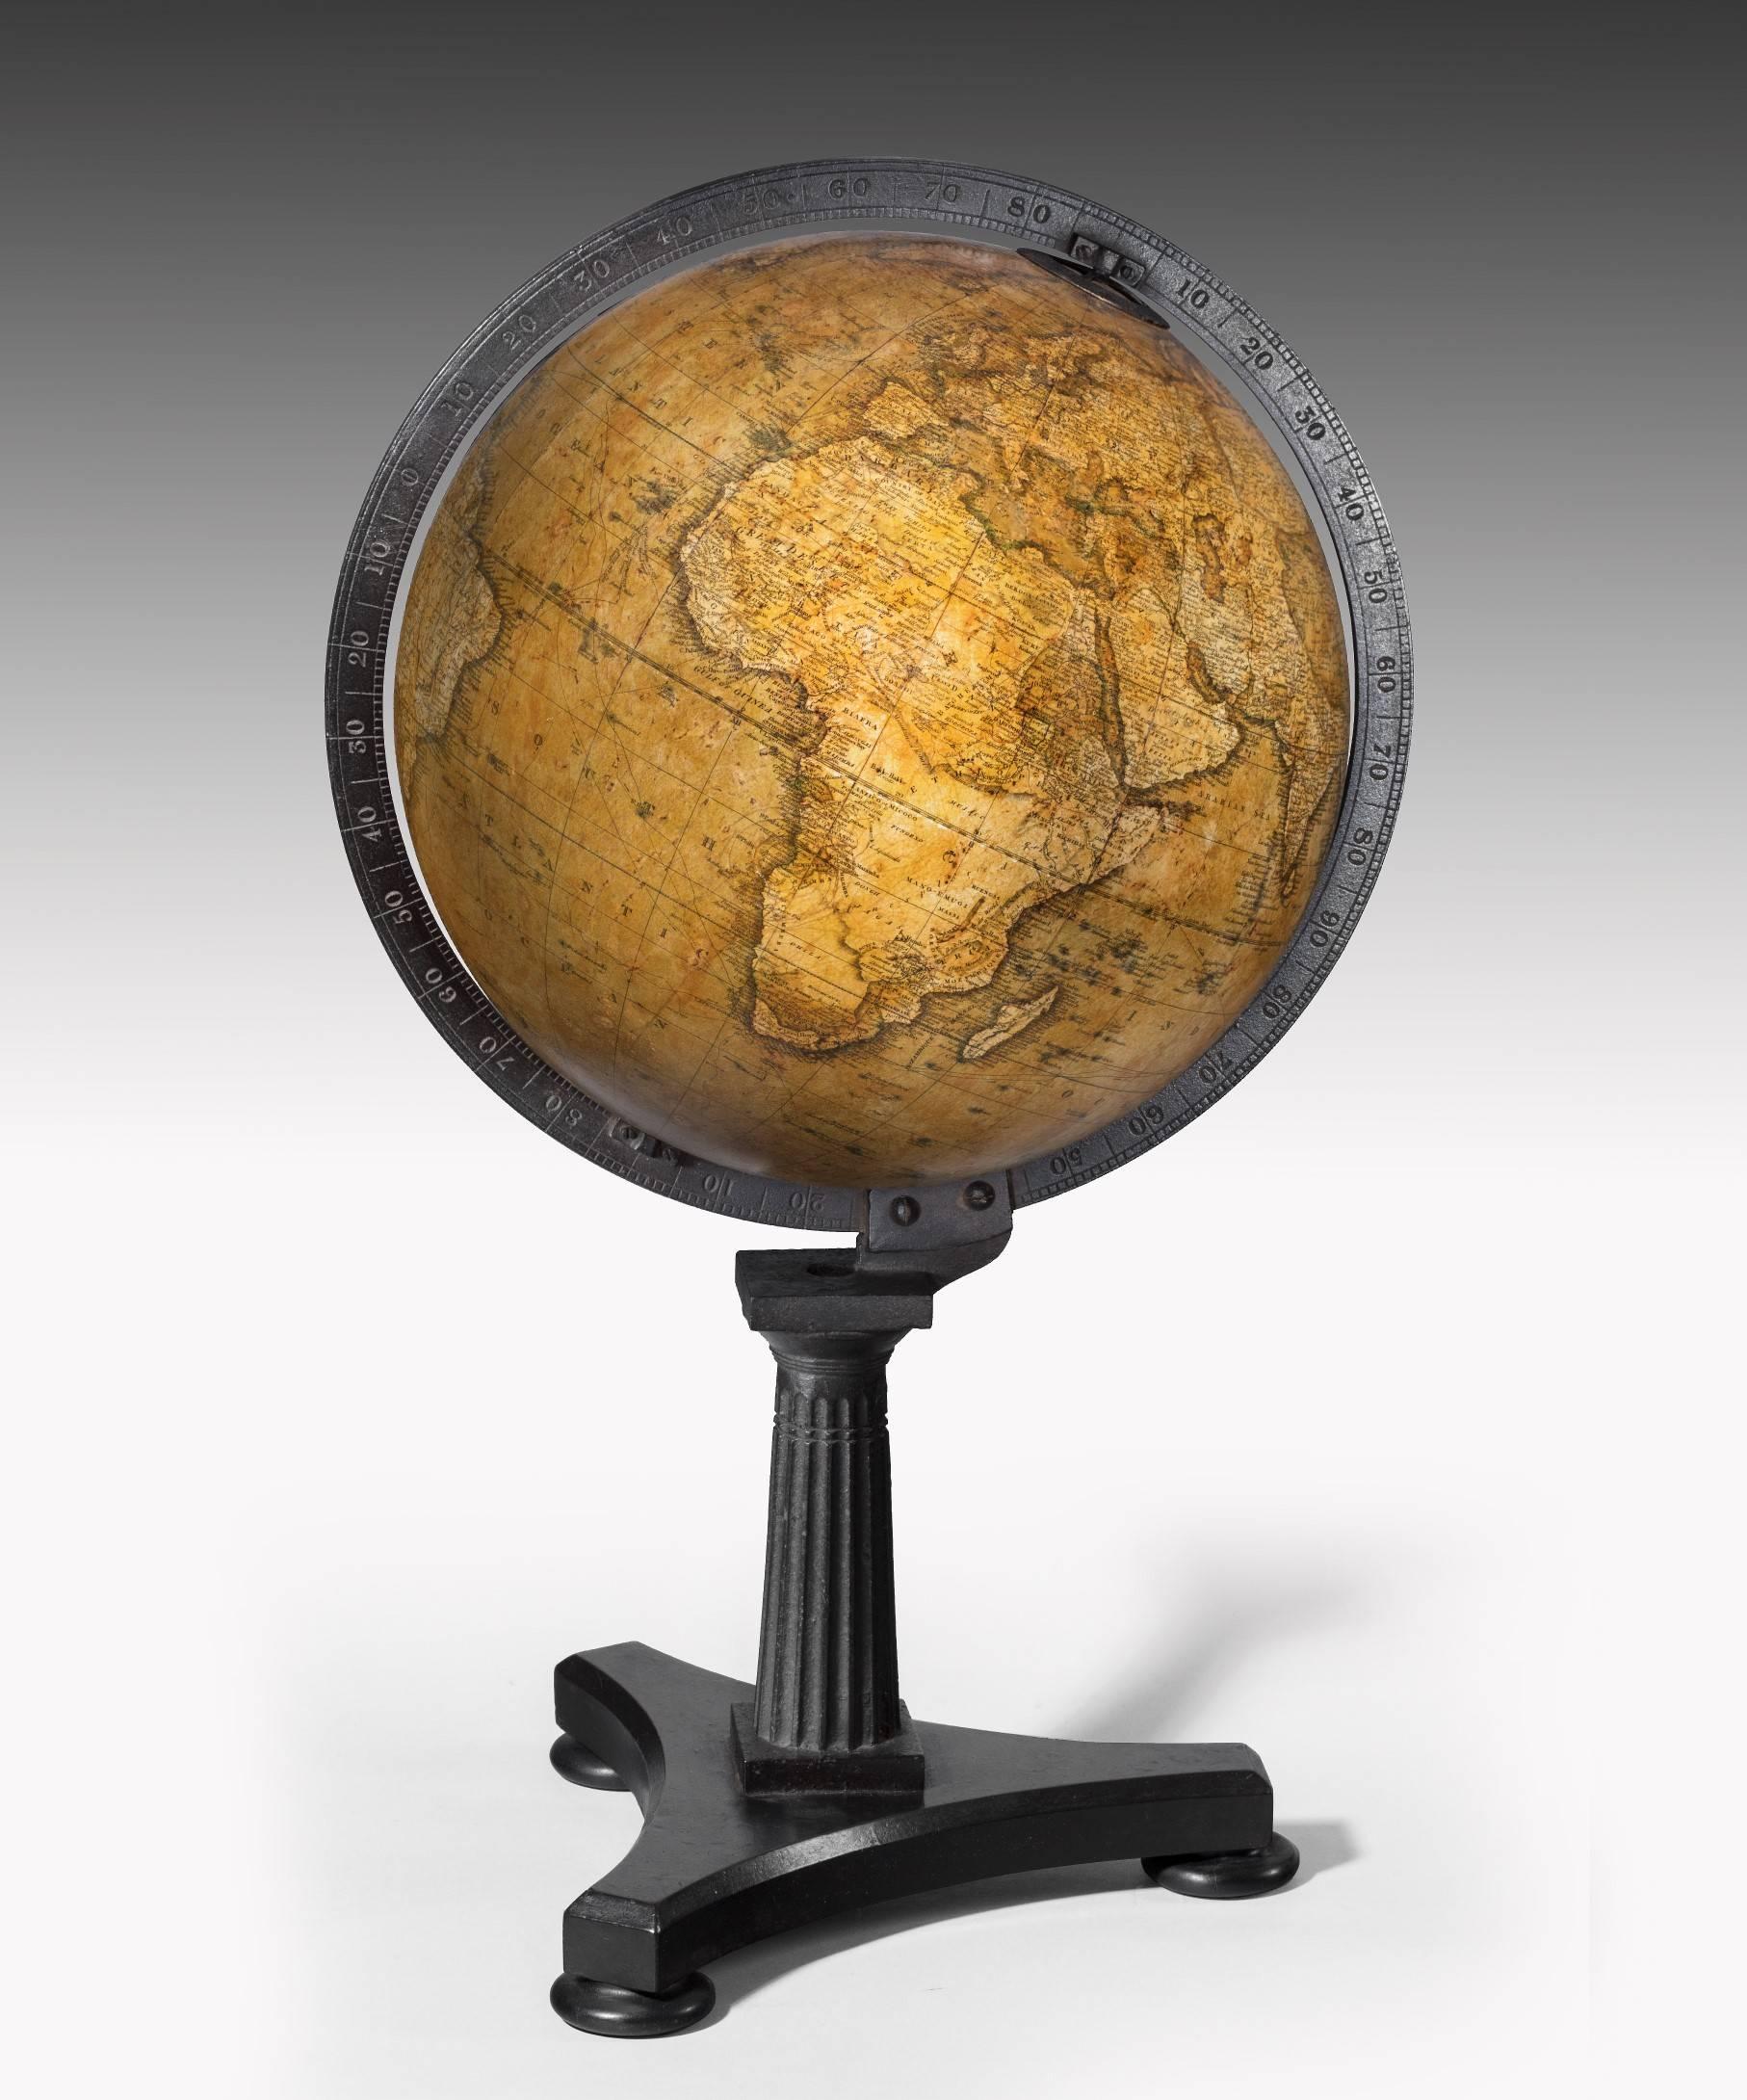 A rare pair of desk globes by the eminent cartopgraphers Newton and Son, dated 1847. The 11